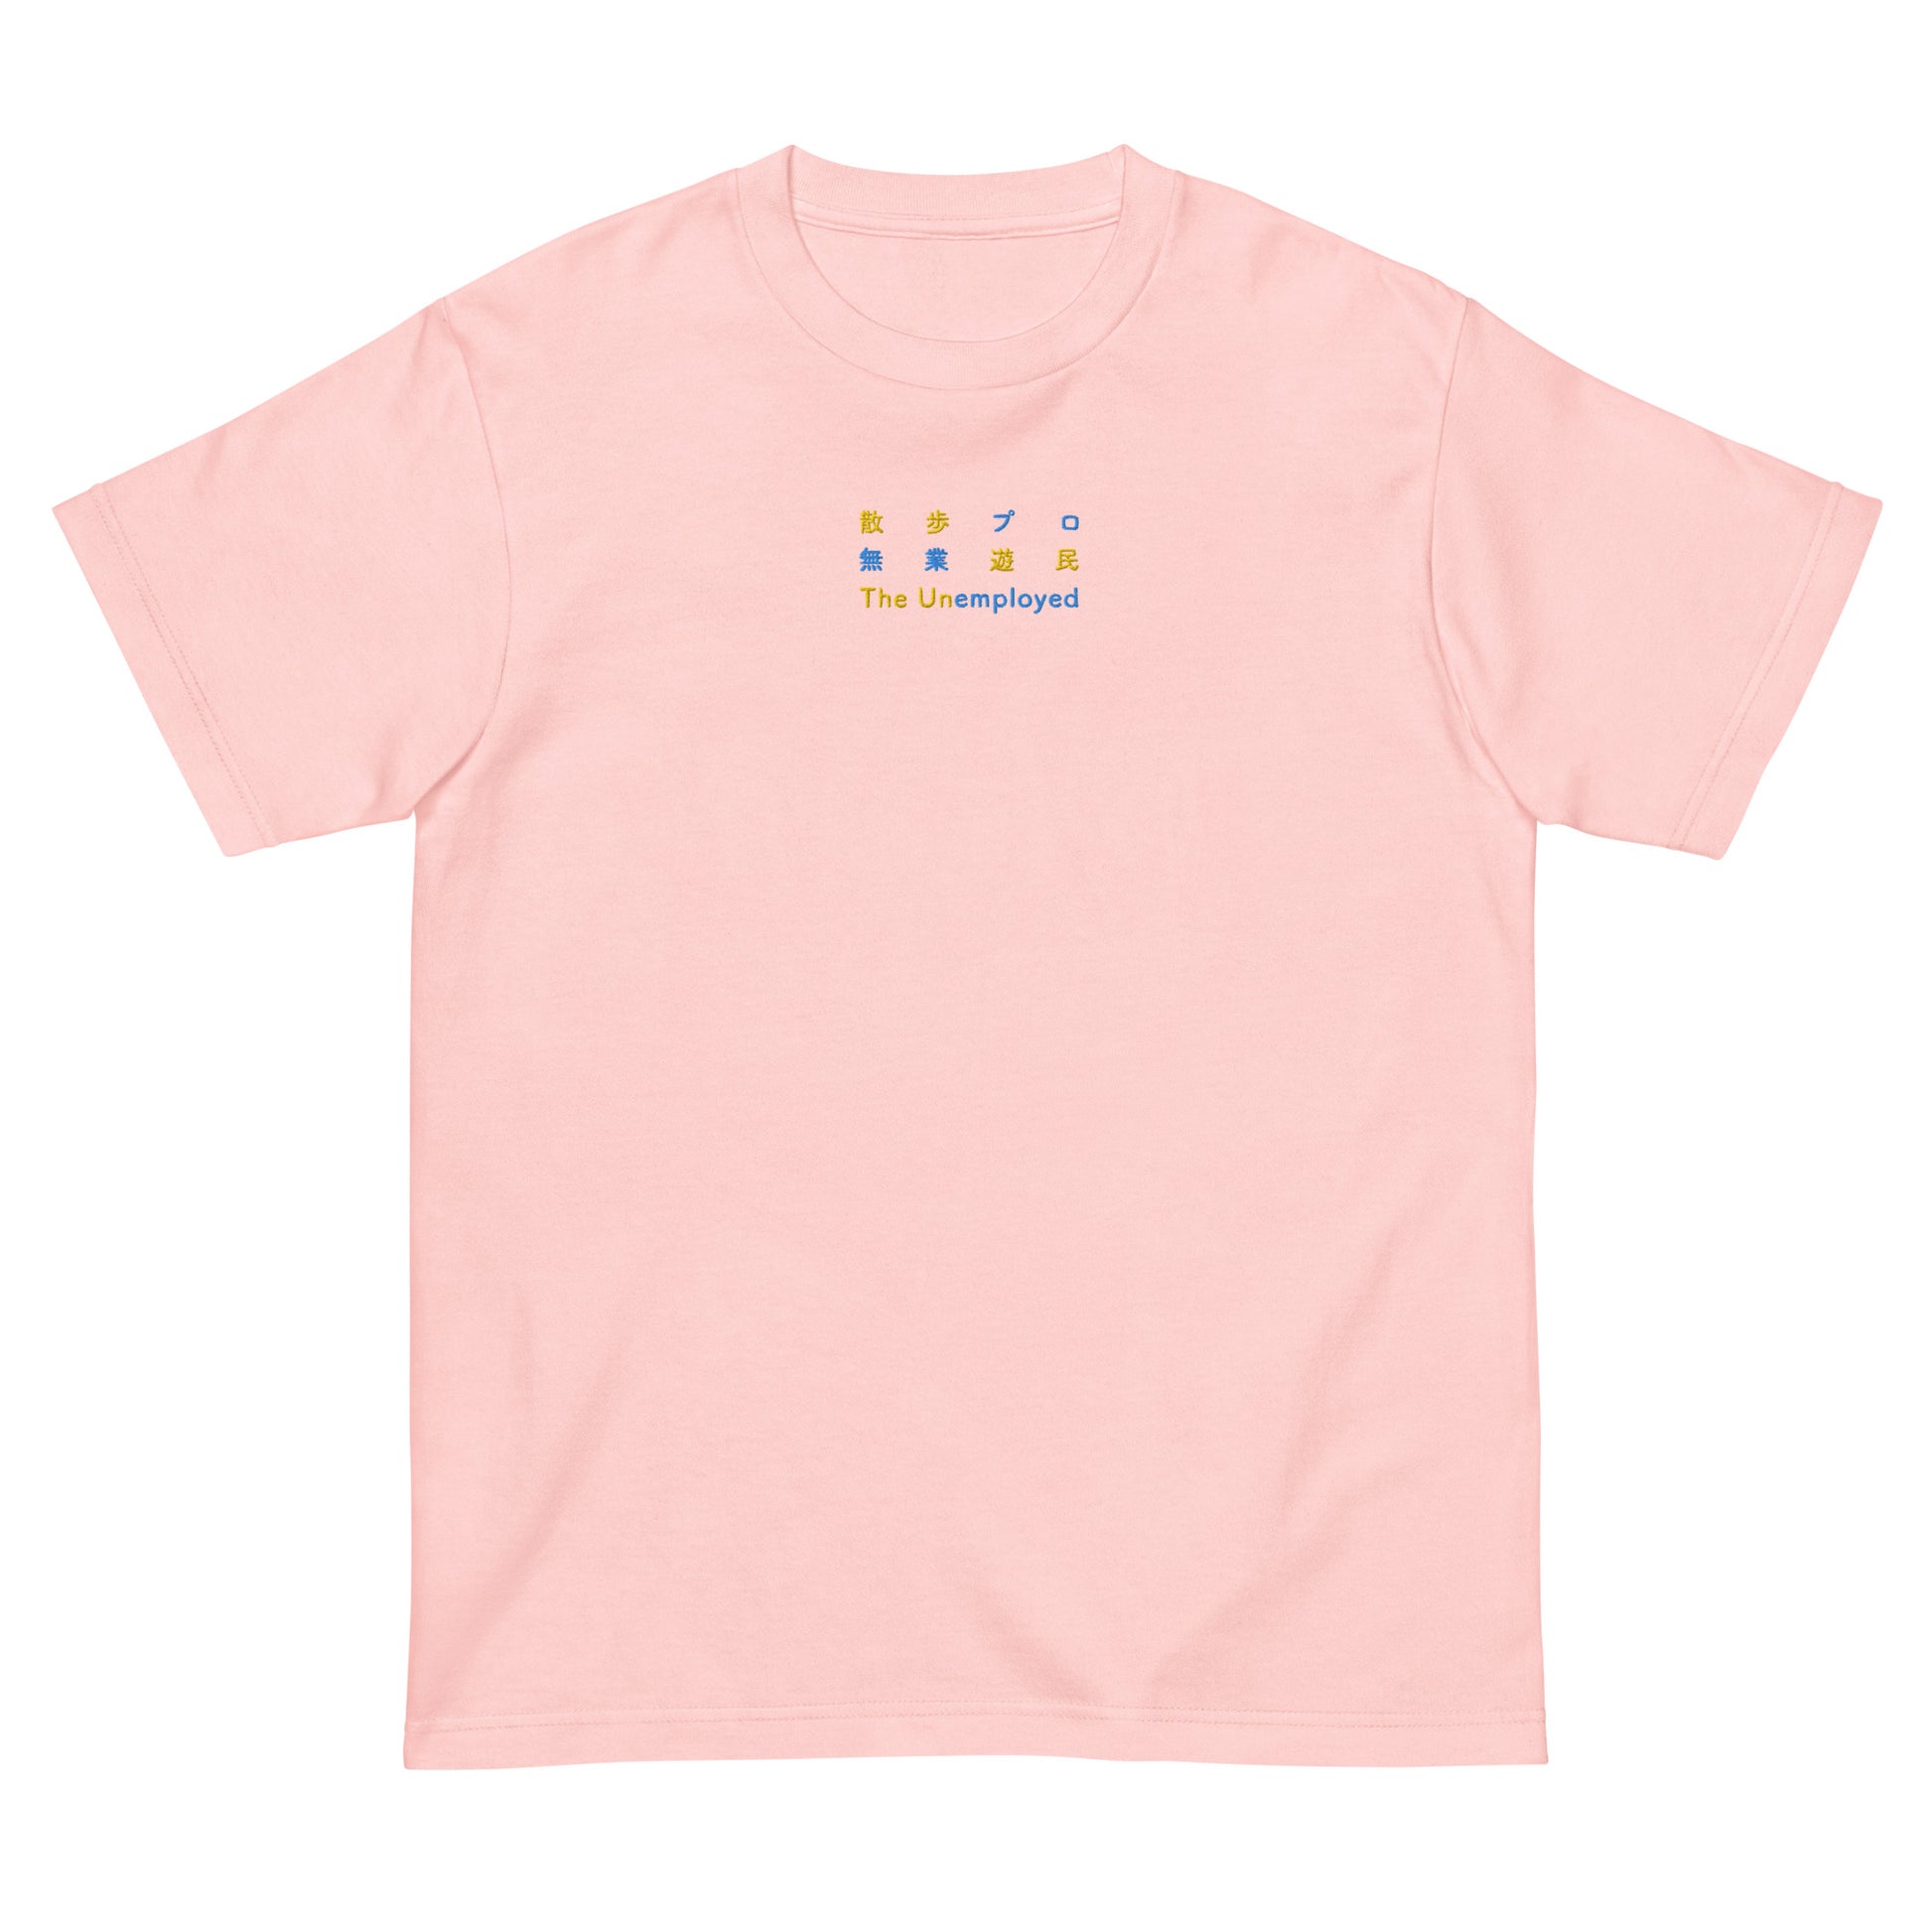 Light Pink High Quality Tee - Front Design with Yellow/Blue Embroidery "The Unemployed" in three languages